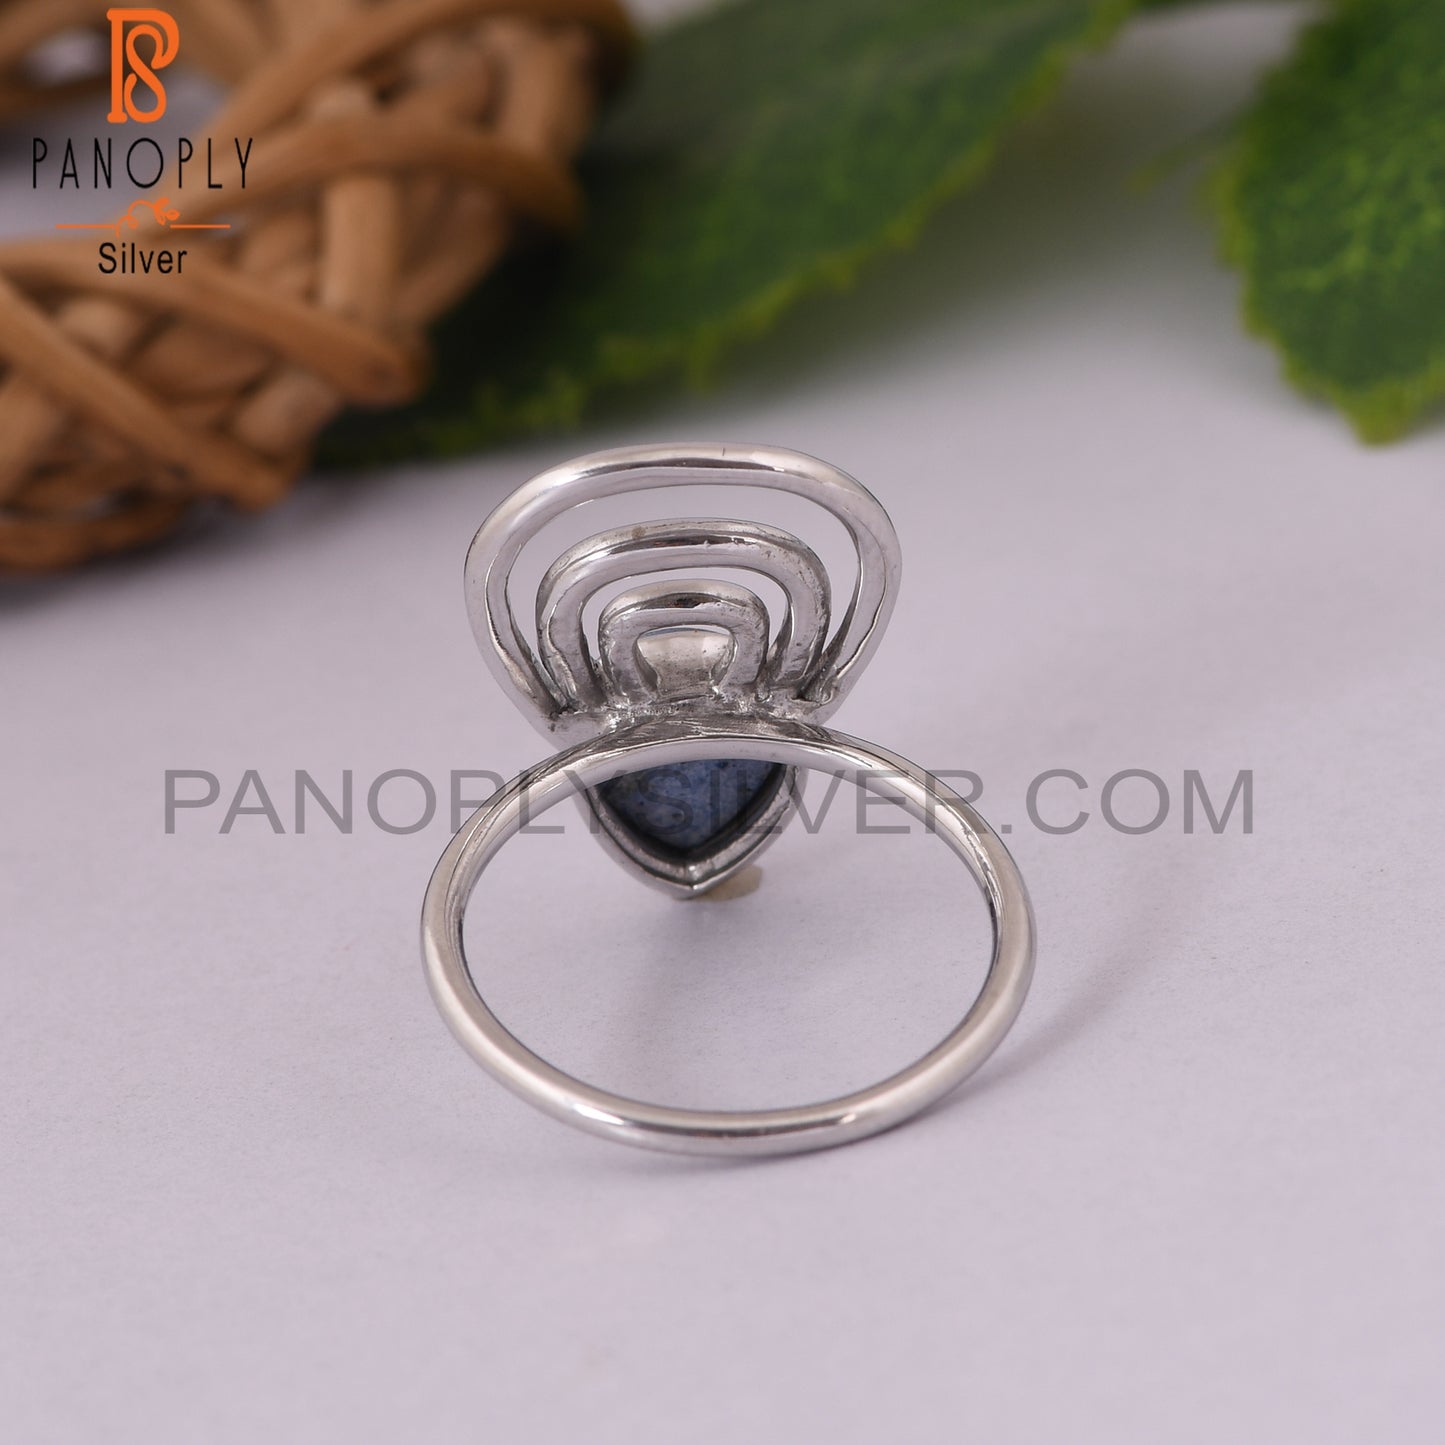 Lapis 925 Silver White Rhodium Plated Ring Jewelry